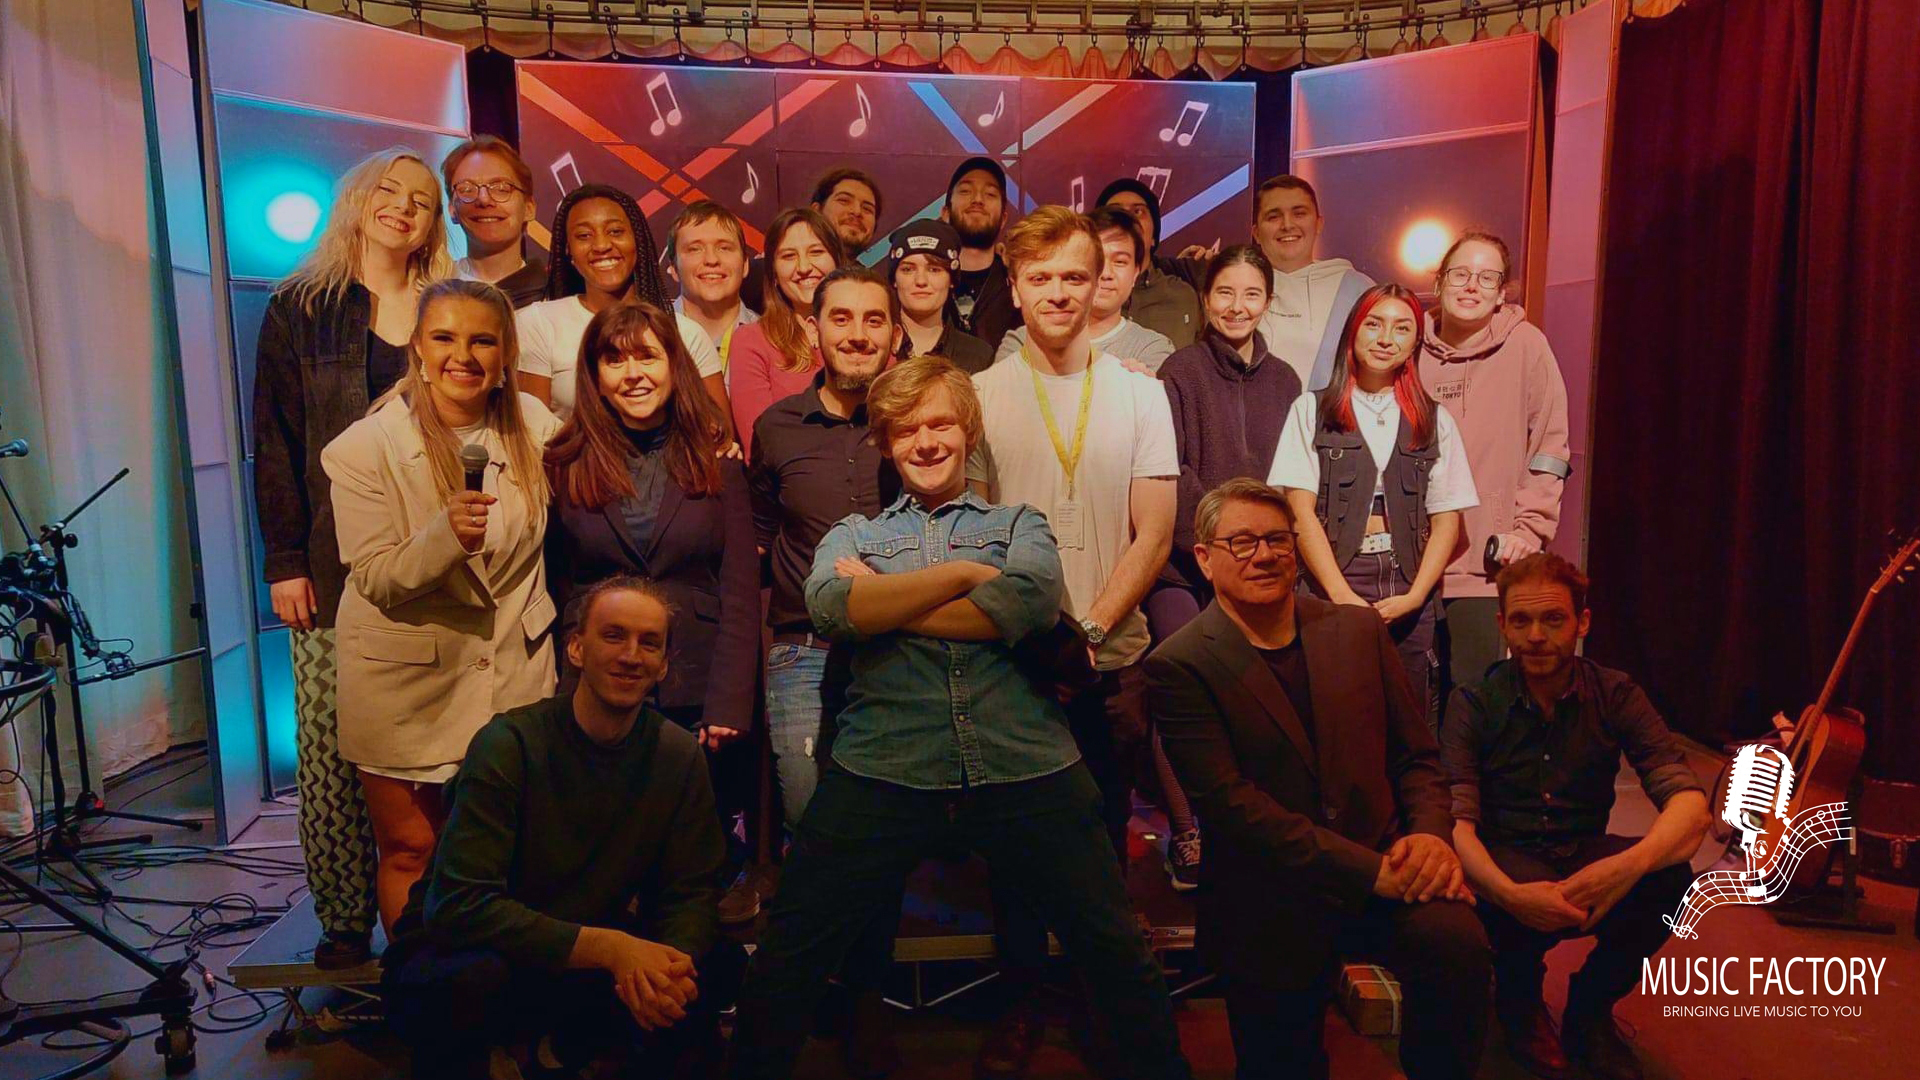 Music Factory Cast and Crew. The cast and crew that were responsible for putting on the Live Production.